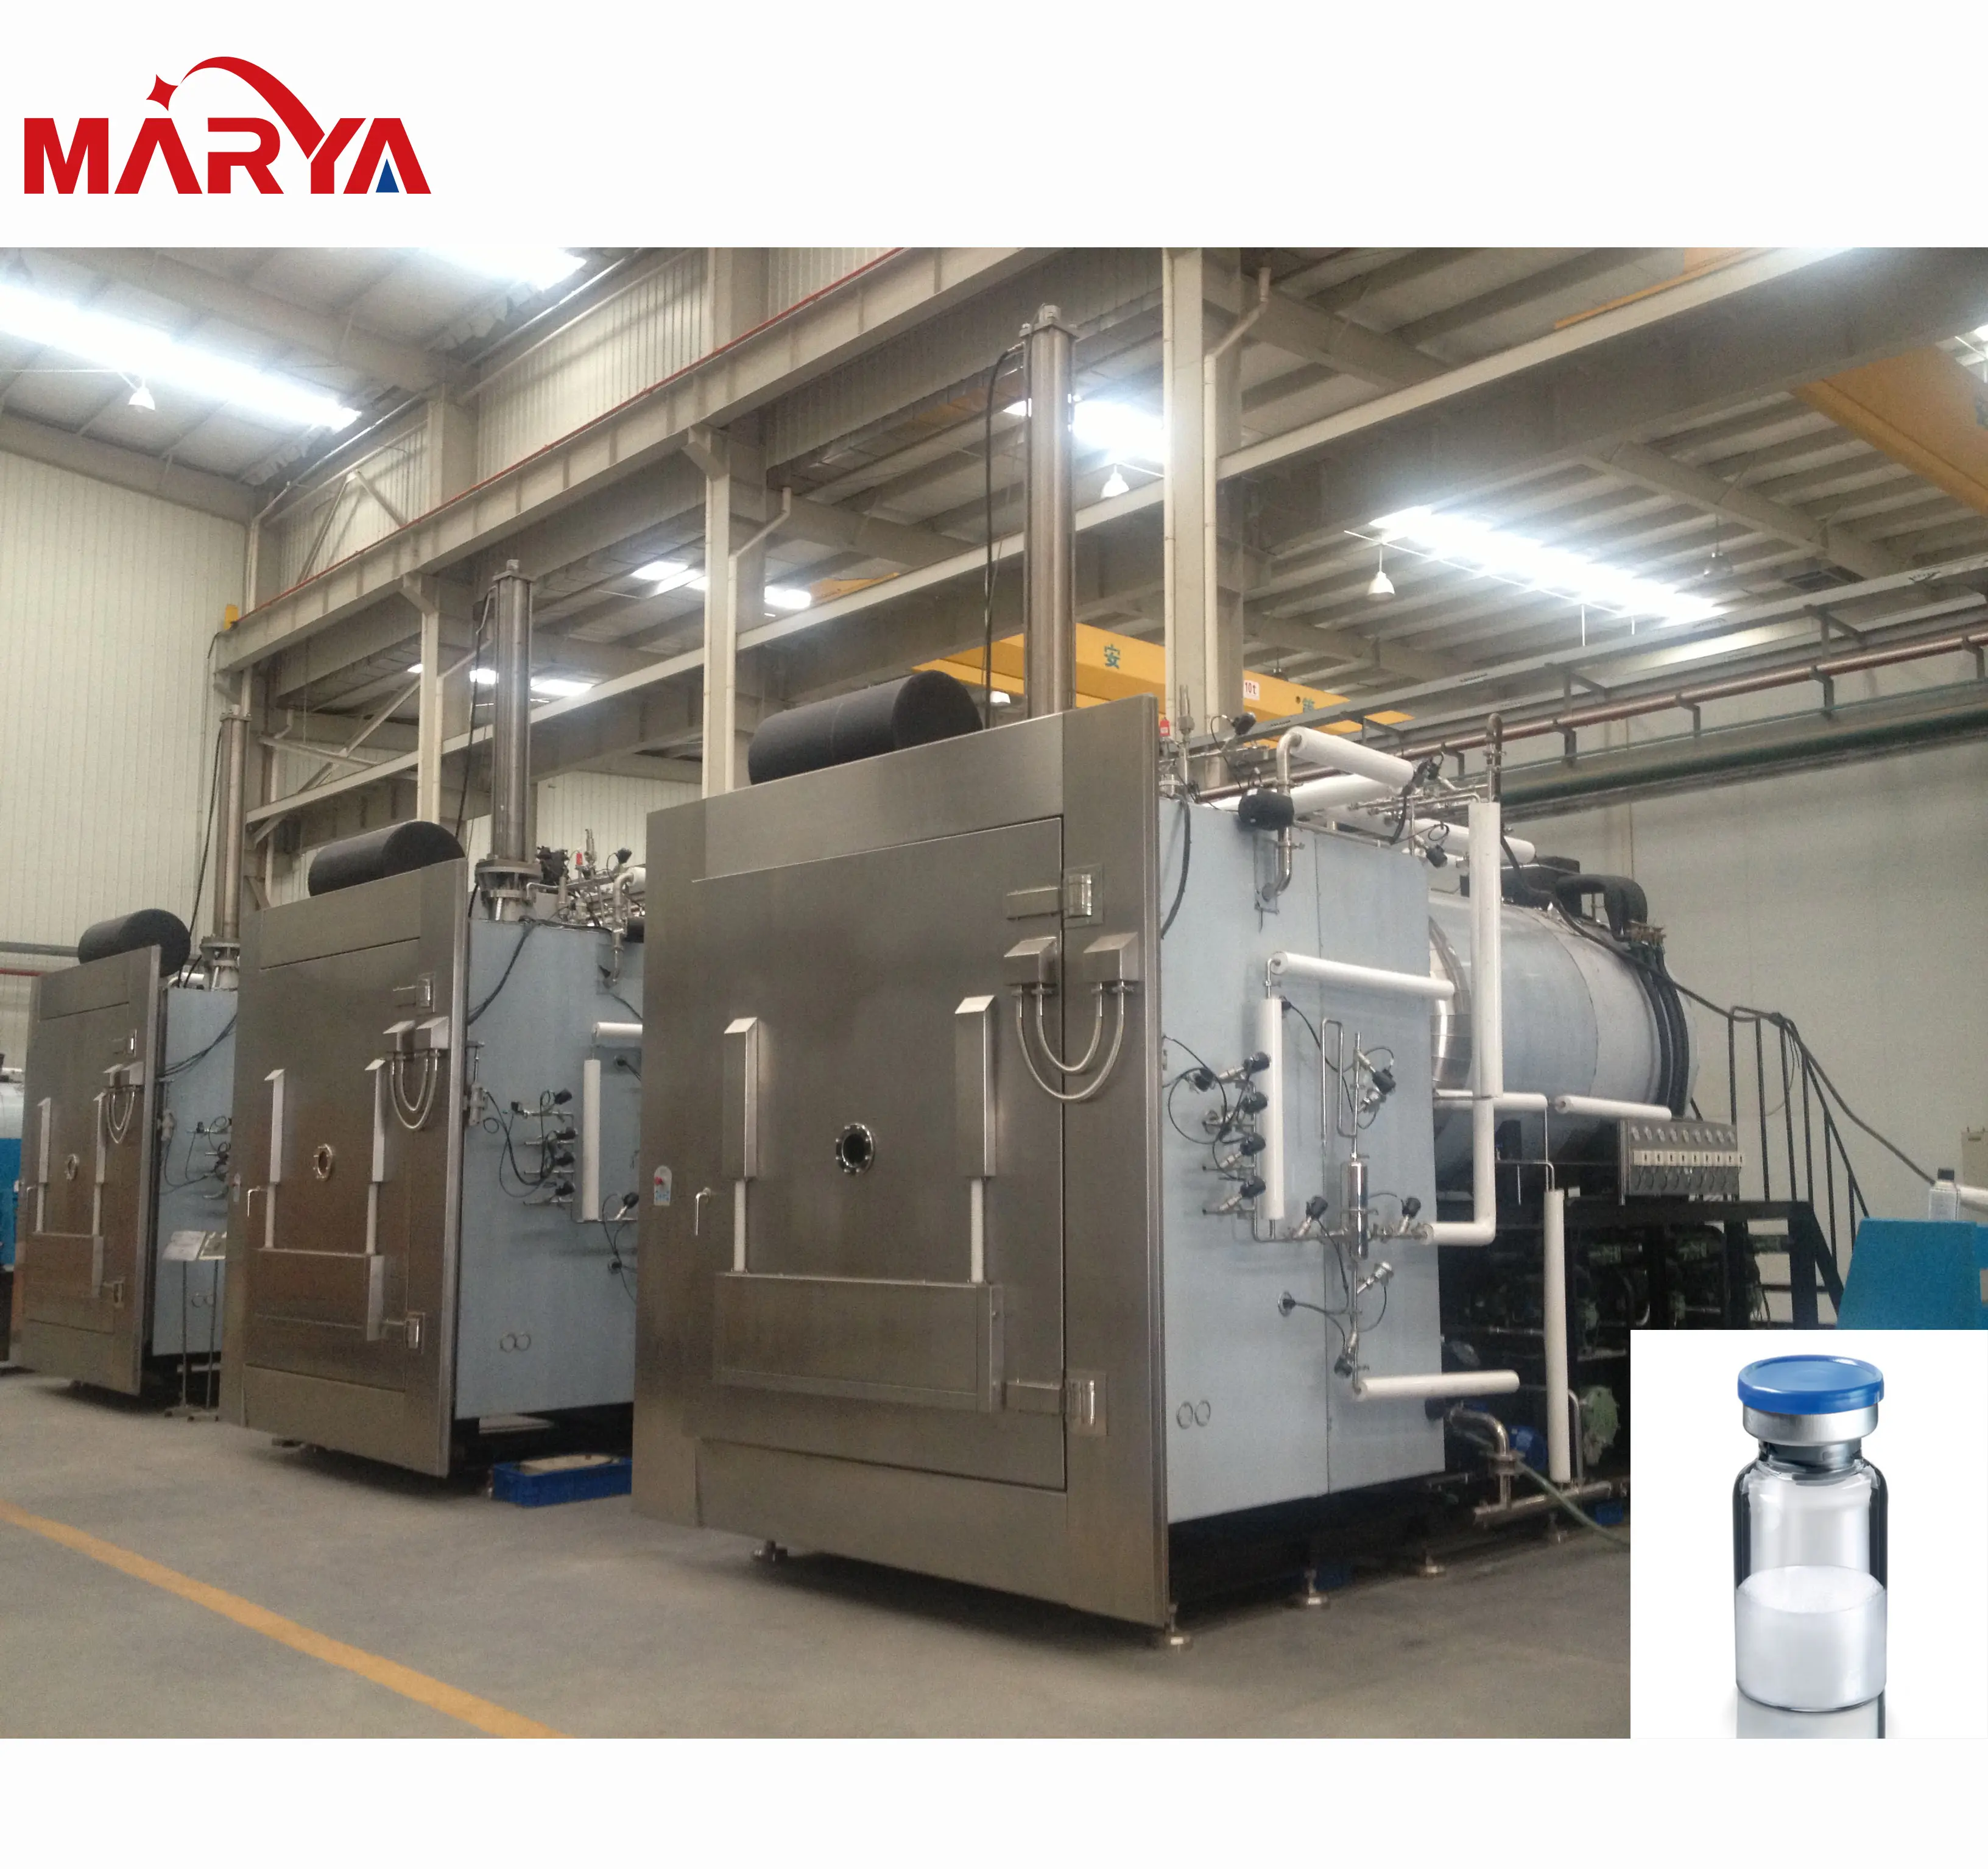 Shanghai Marya vacuum freeze dryer, lyophilizer is widely used for food industry